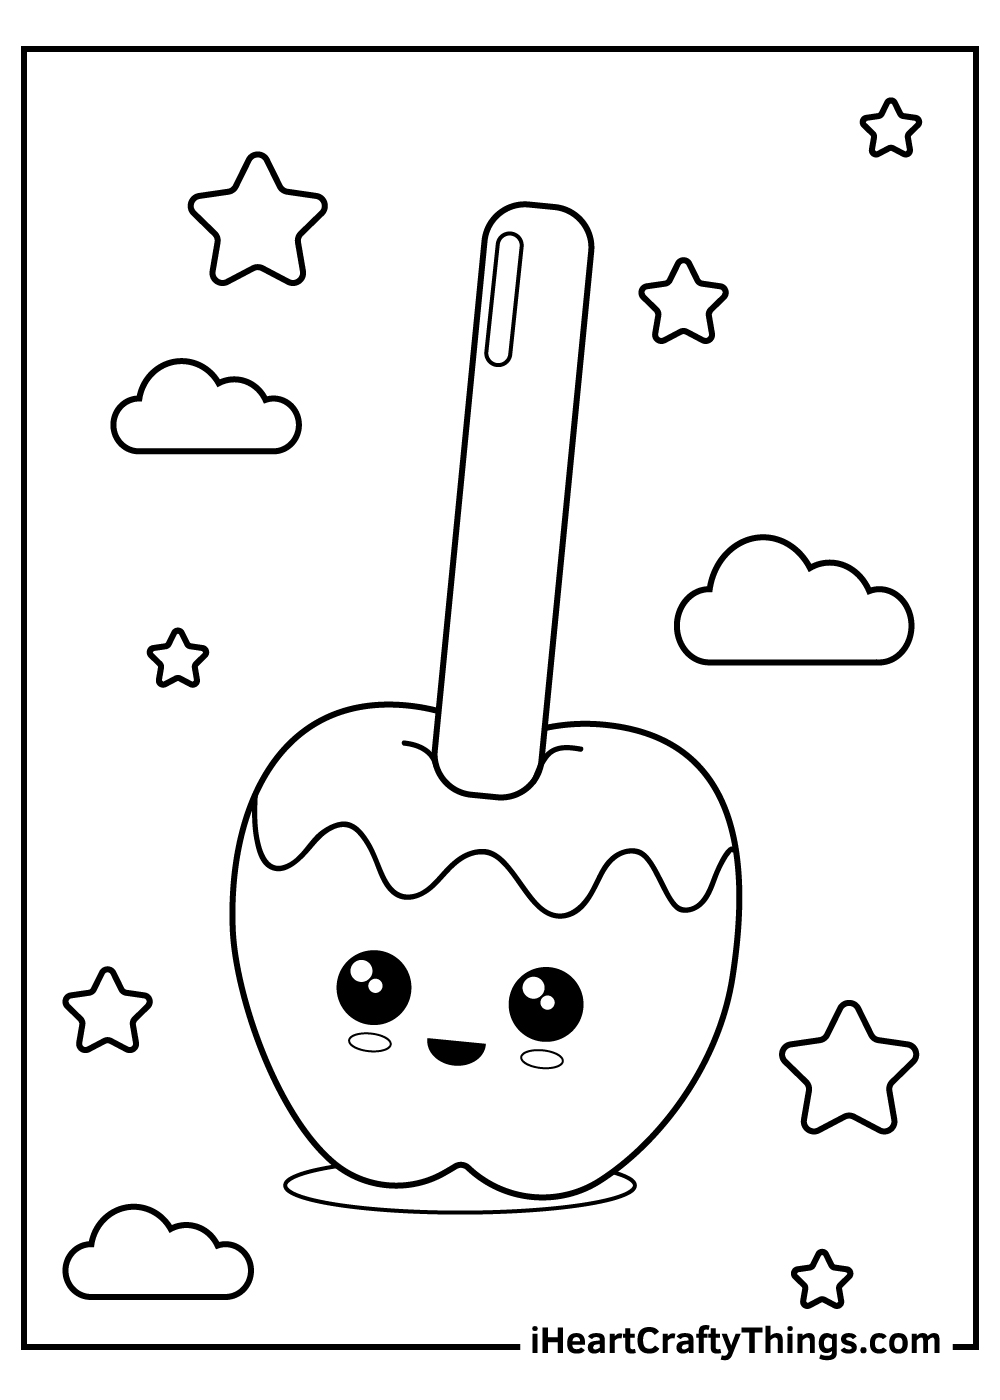 Candy coloring pages free printables